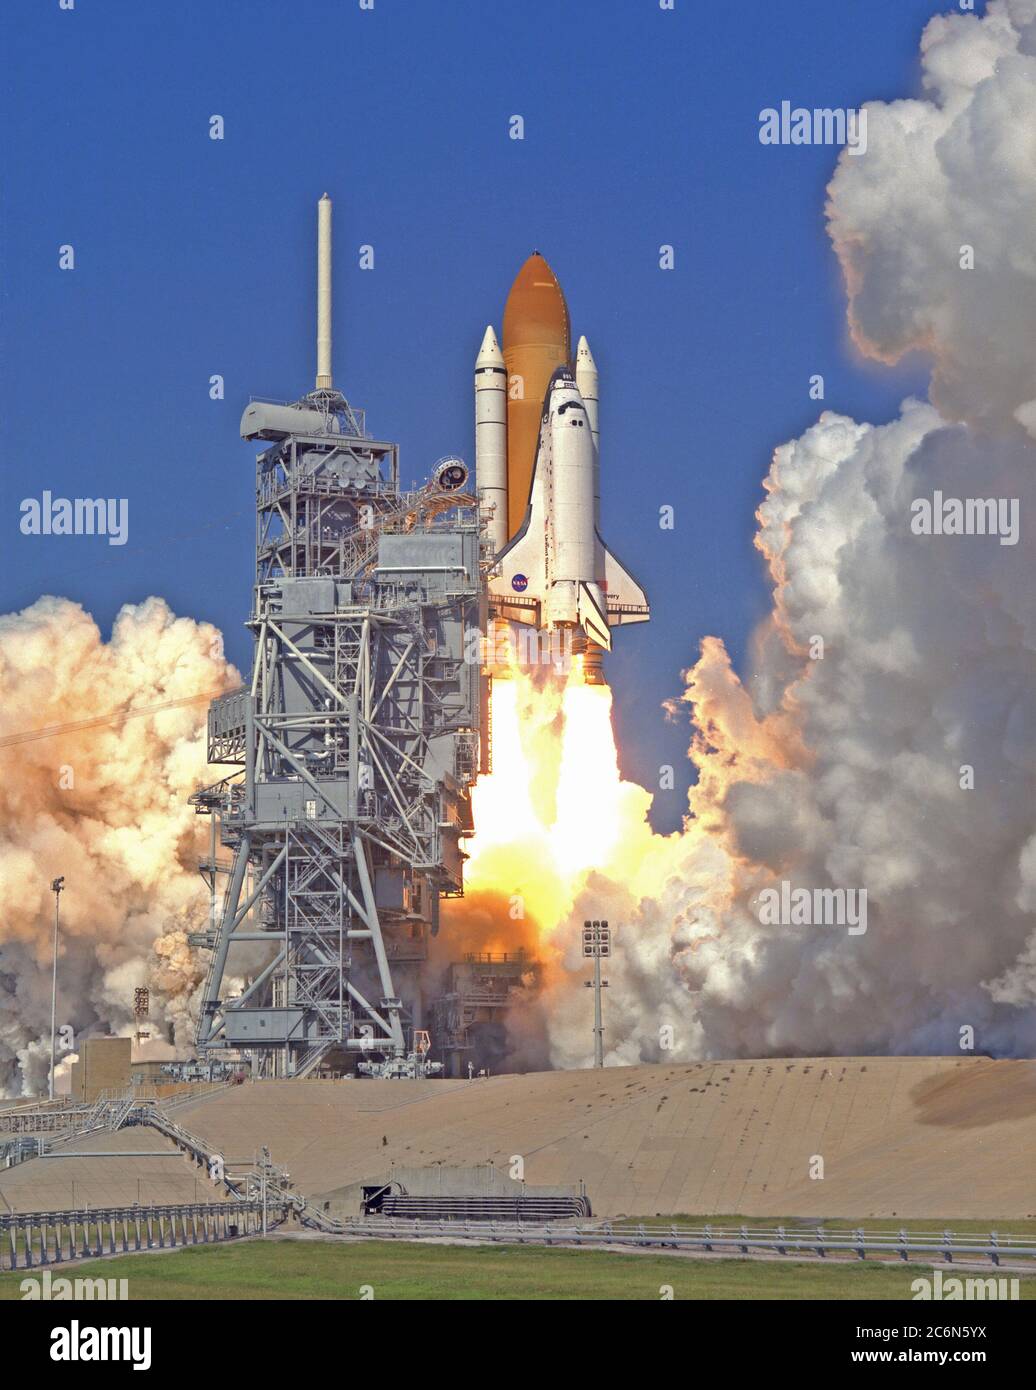 (29 Oct. 1998) --- The space shuttle Discovery lifts off Launch Pad 39B to begin a nine-day mission in Earth-orbit. Launch was at 2:19 p.m. (EST), Oct. 29, 1998. Onboard were Curtis L. Brown Jr., Steven W. Lindsey, Scott F. Parazynski, Steven K. Robinson, Pedro Duque, United States Senator John H. Glenn Jr. and Chiaki Naito-Mukai. Duque is a mission specialist representing the European Space Agency (ESA) and Mukai is a payload specialist representing Japan's National Space Development Agency (NASDA). Glenn, making his second spaceflight but his first in 36 years, joins Mukai as a payload speci Stock Photo